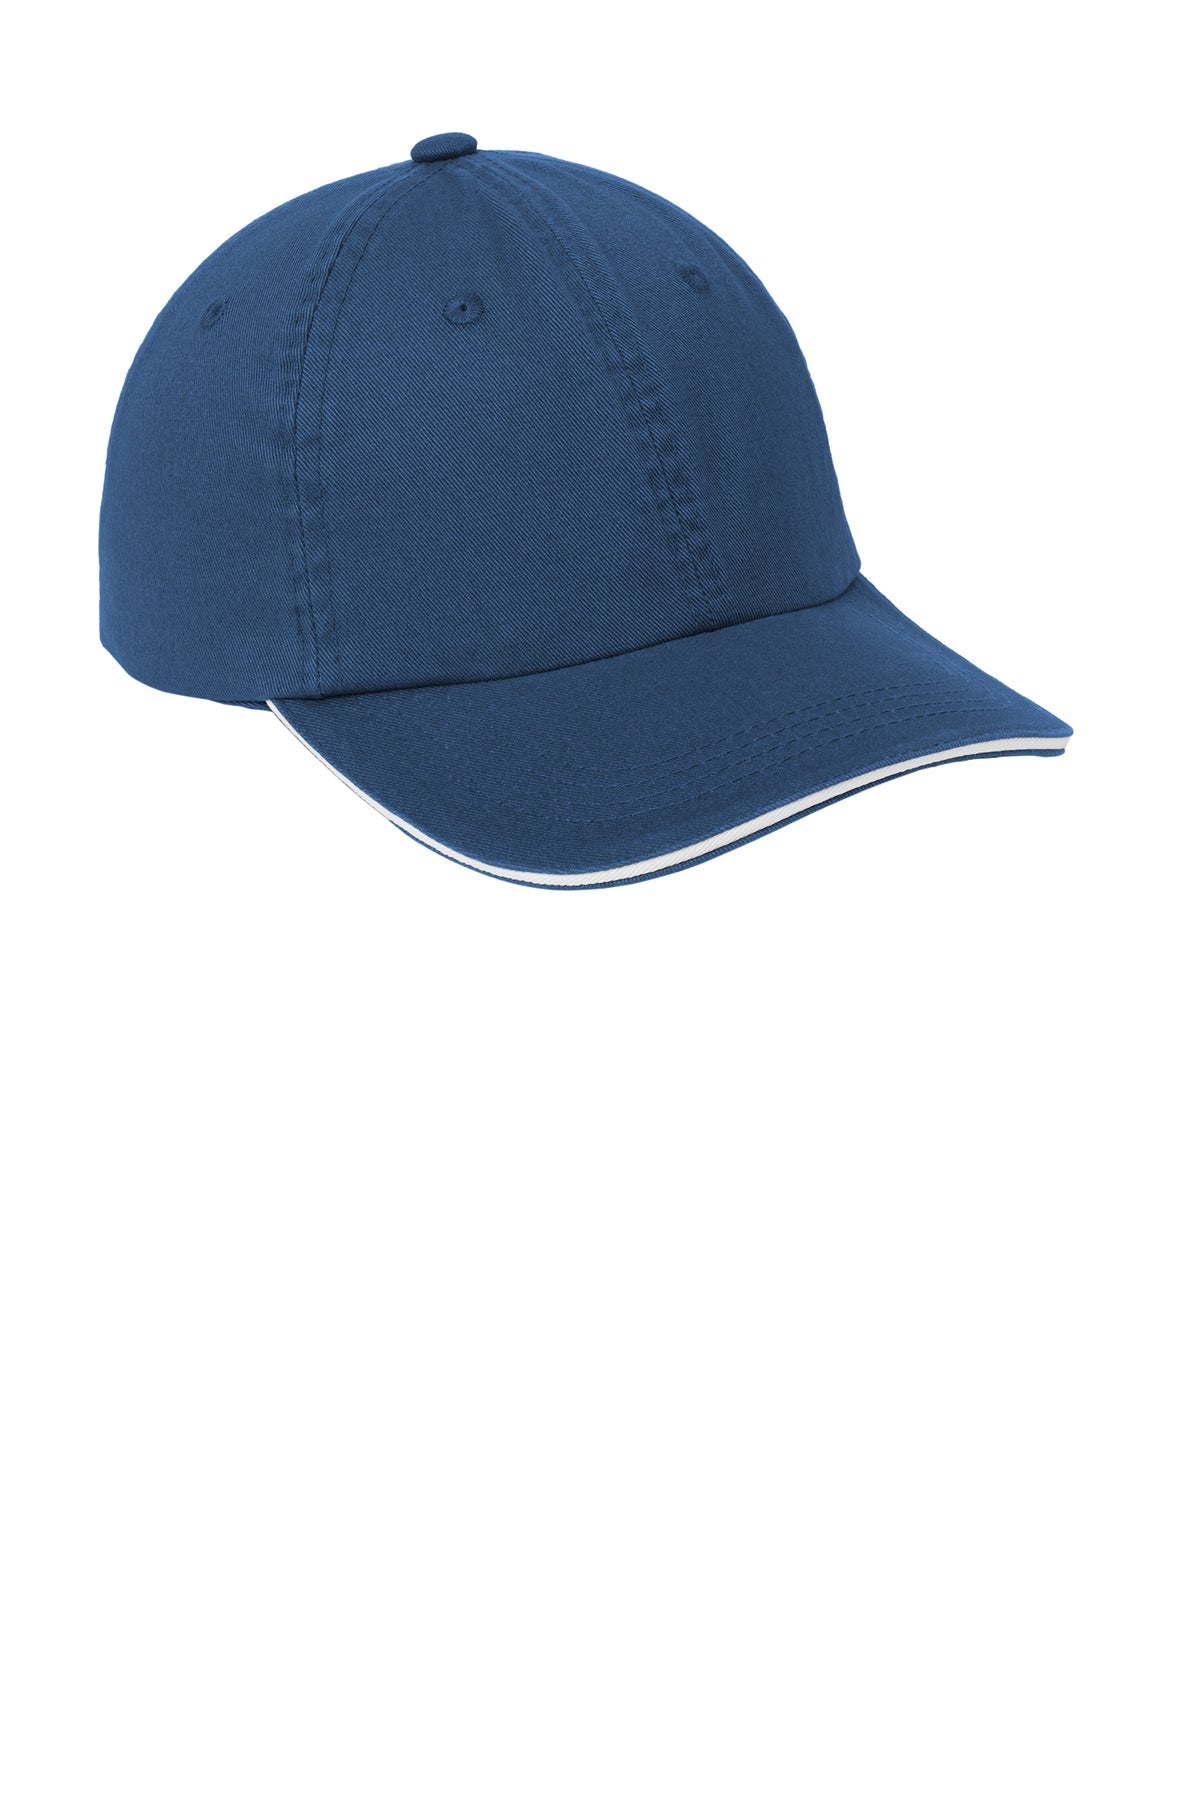 Port Authority Sandwich Bill Custom Caps with Striped Closure, Ensign Blue/White